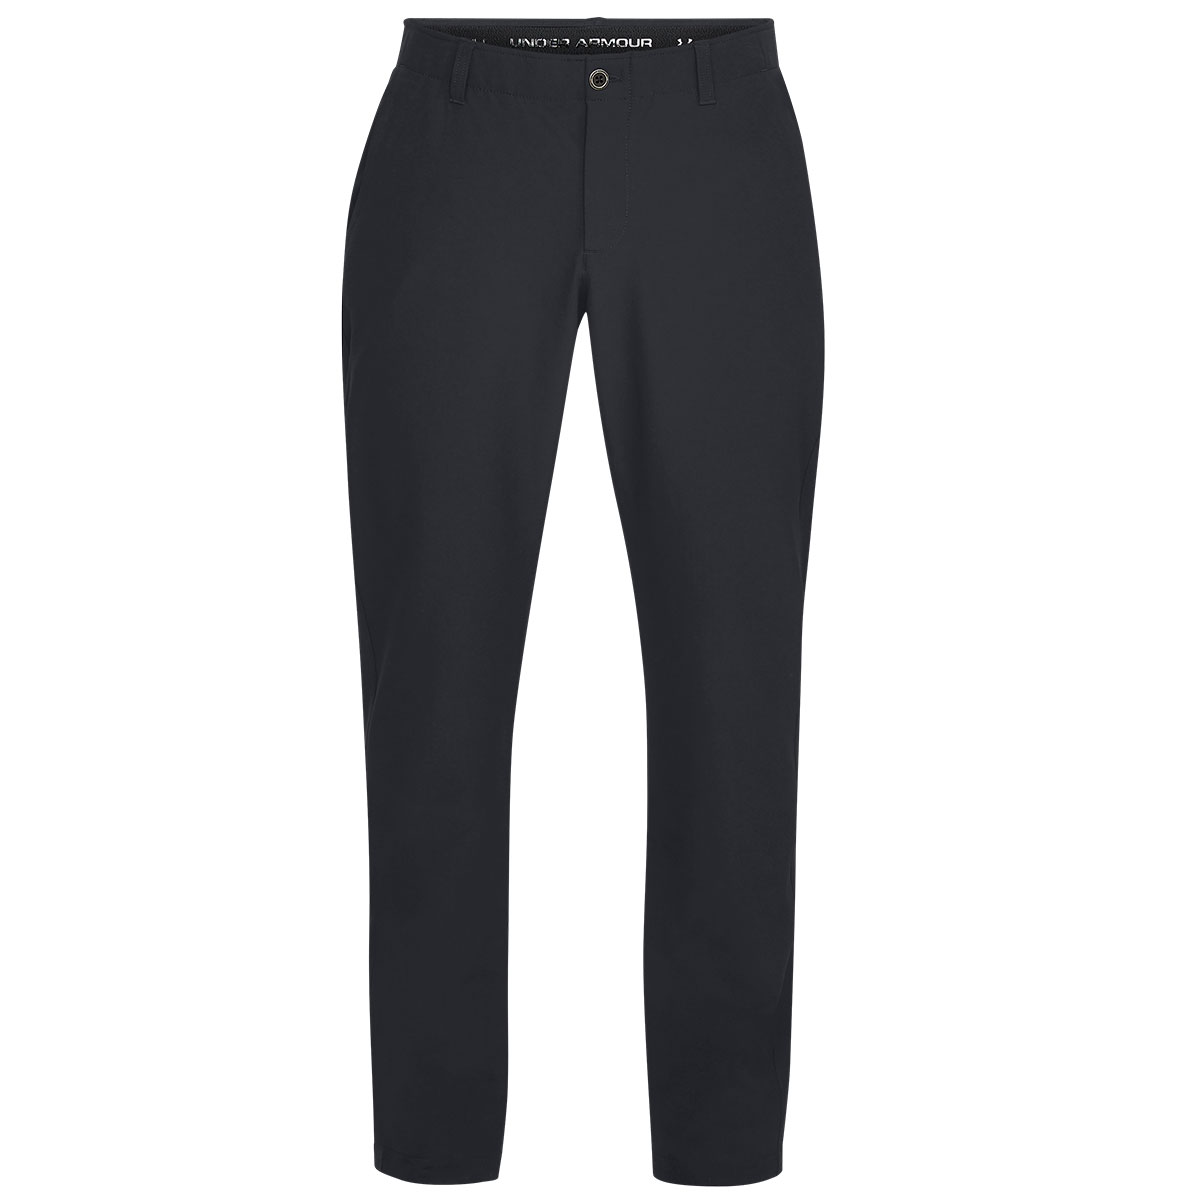 Match Play CGI Tapered Winter Trousers 